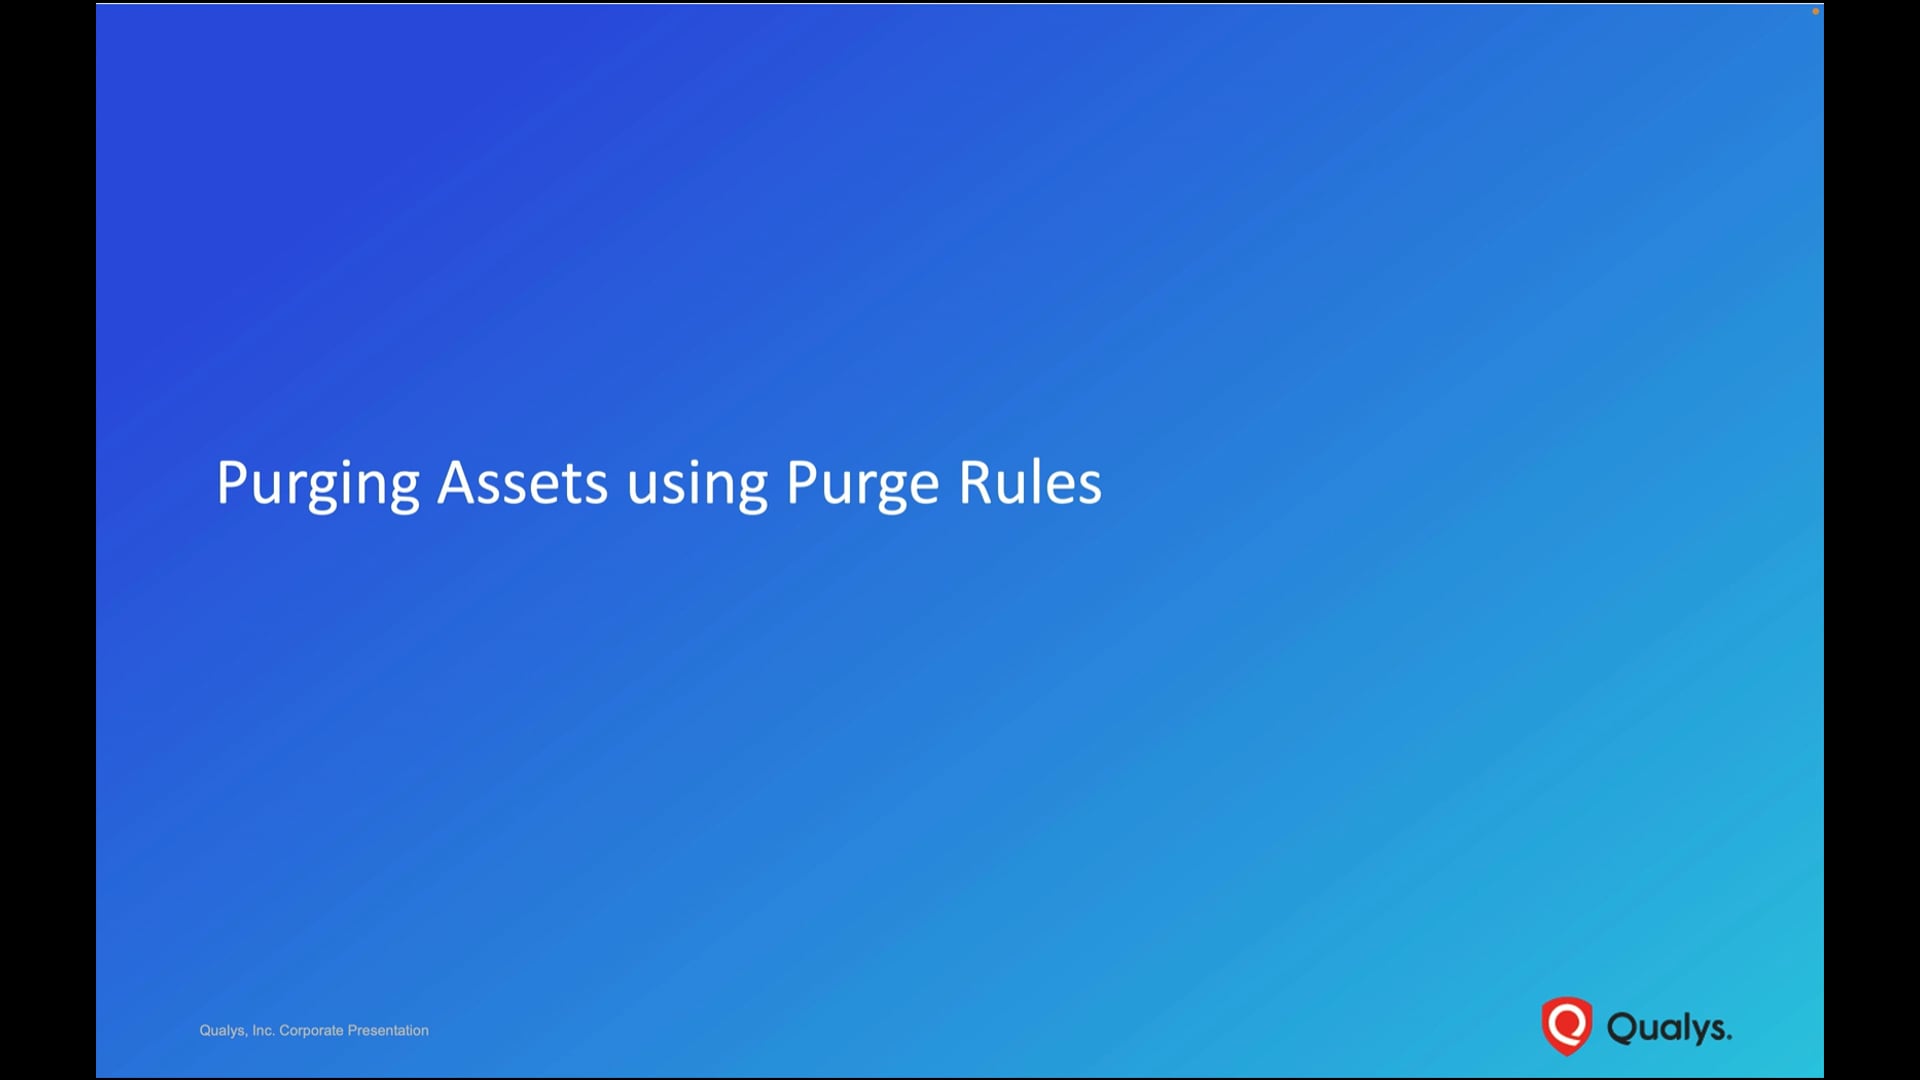 Purging Assets using Purge Rules